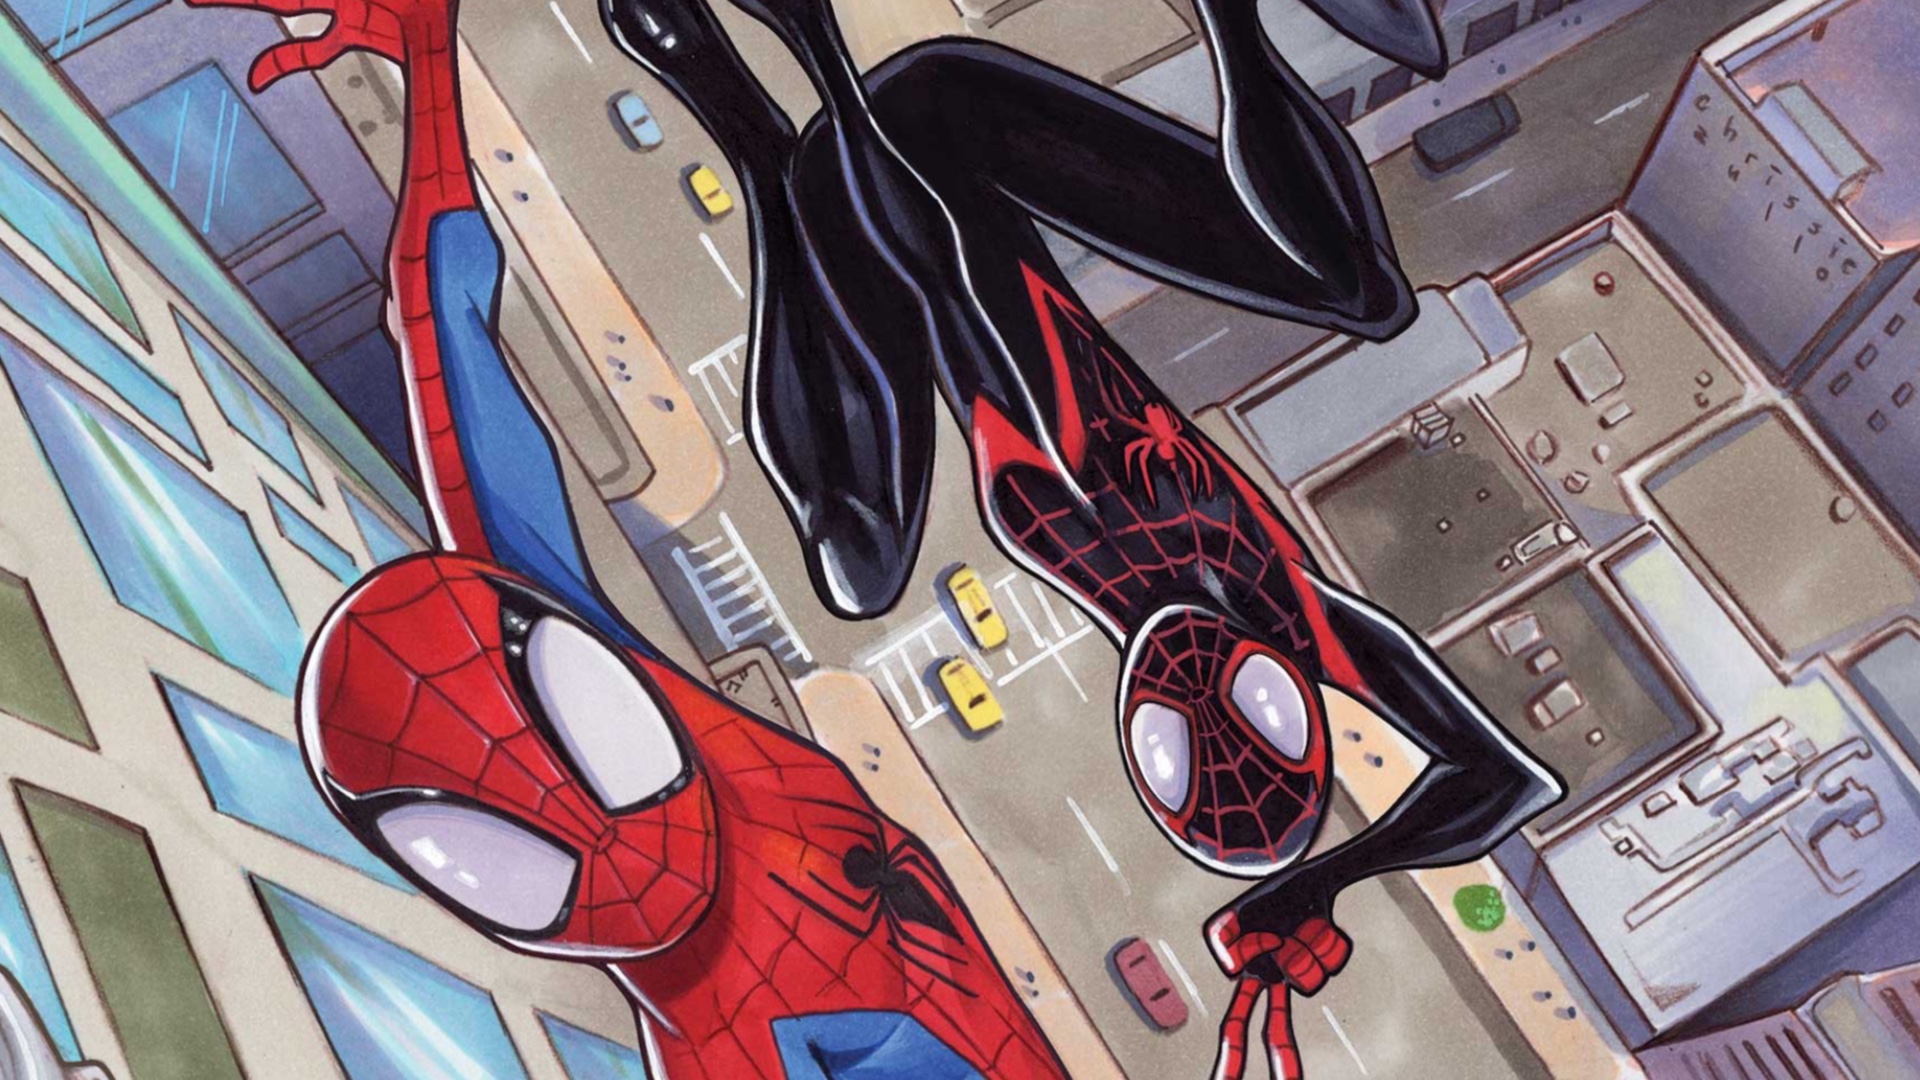 miles morales and peter parker